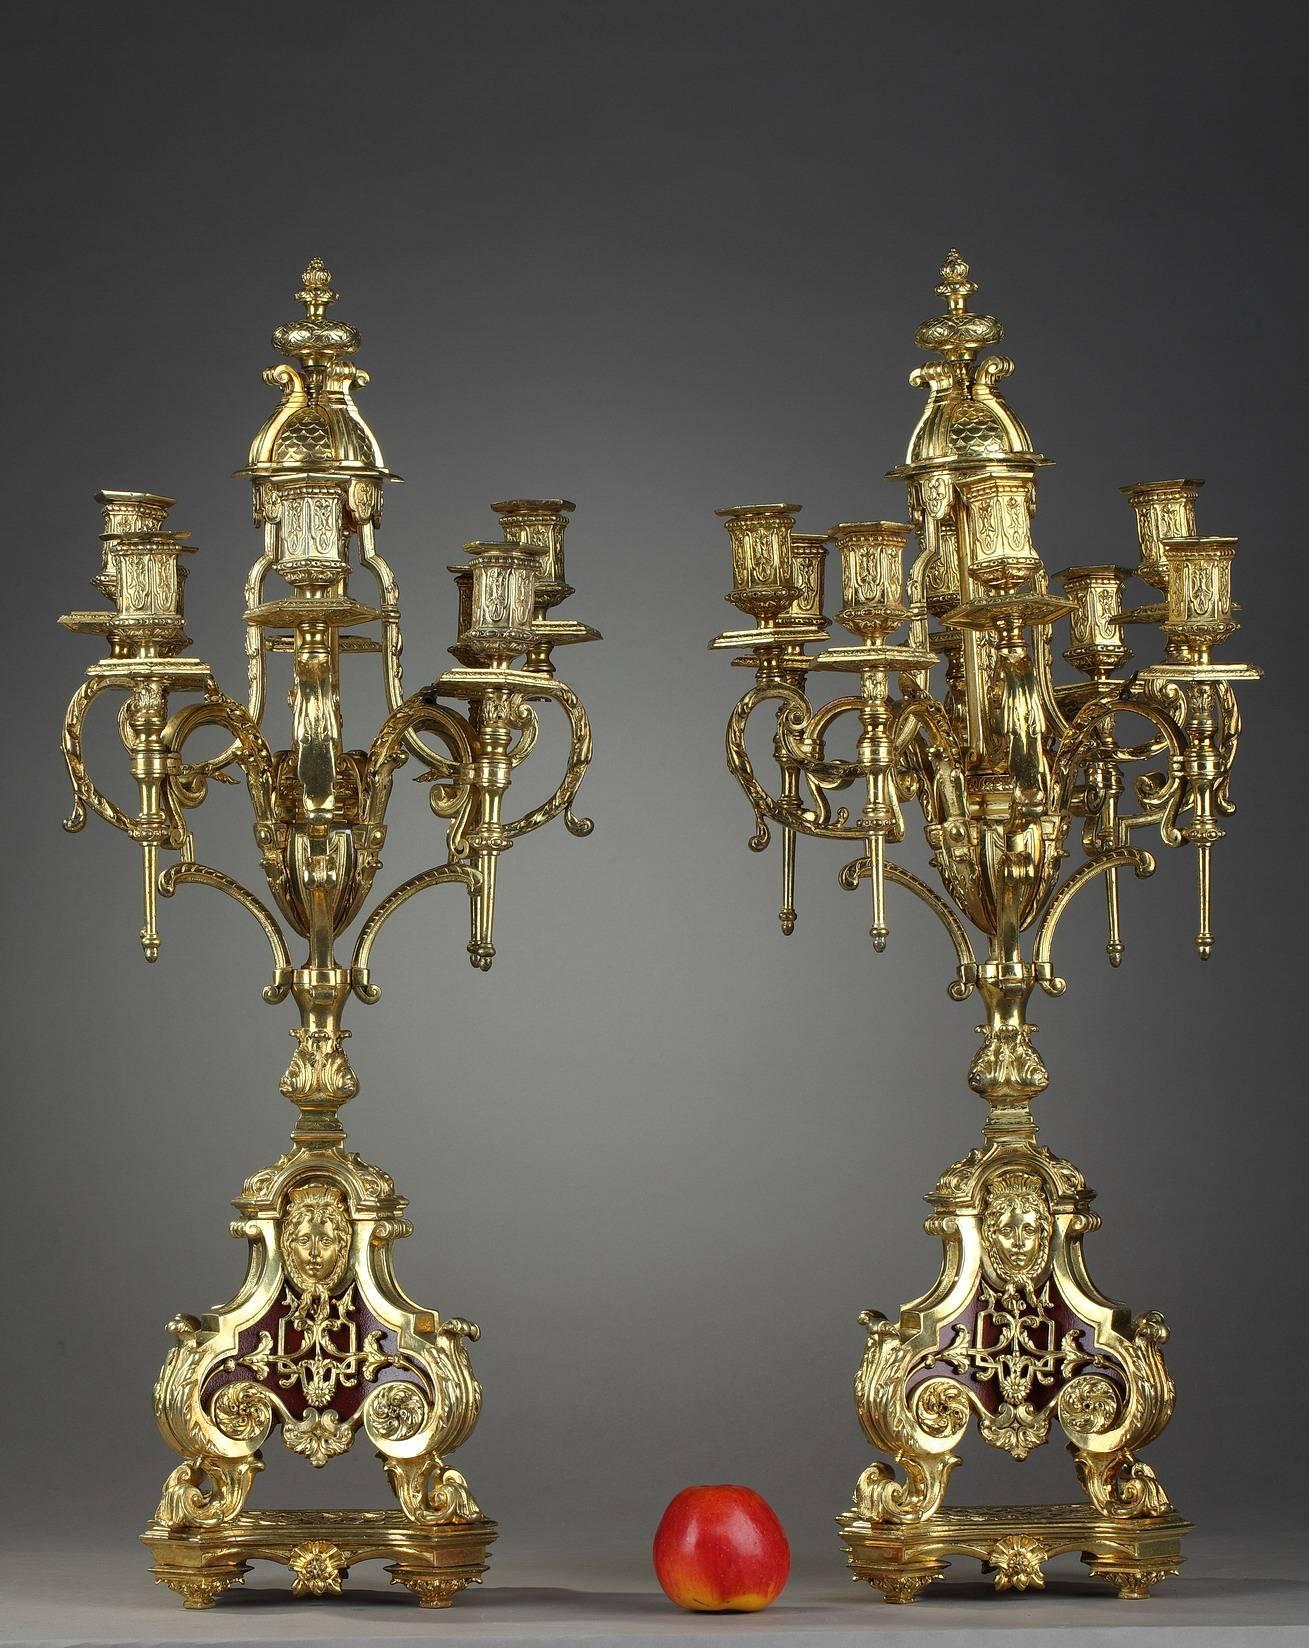 Napoleon III Gilt Bronze and Varnished Wood Clock and Pair of Candelabra 1